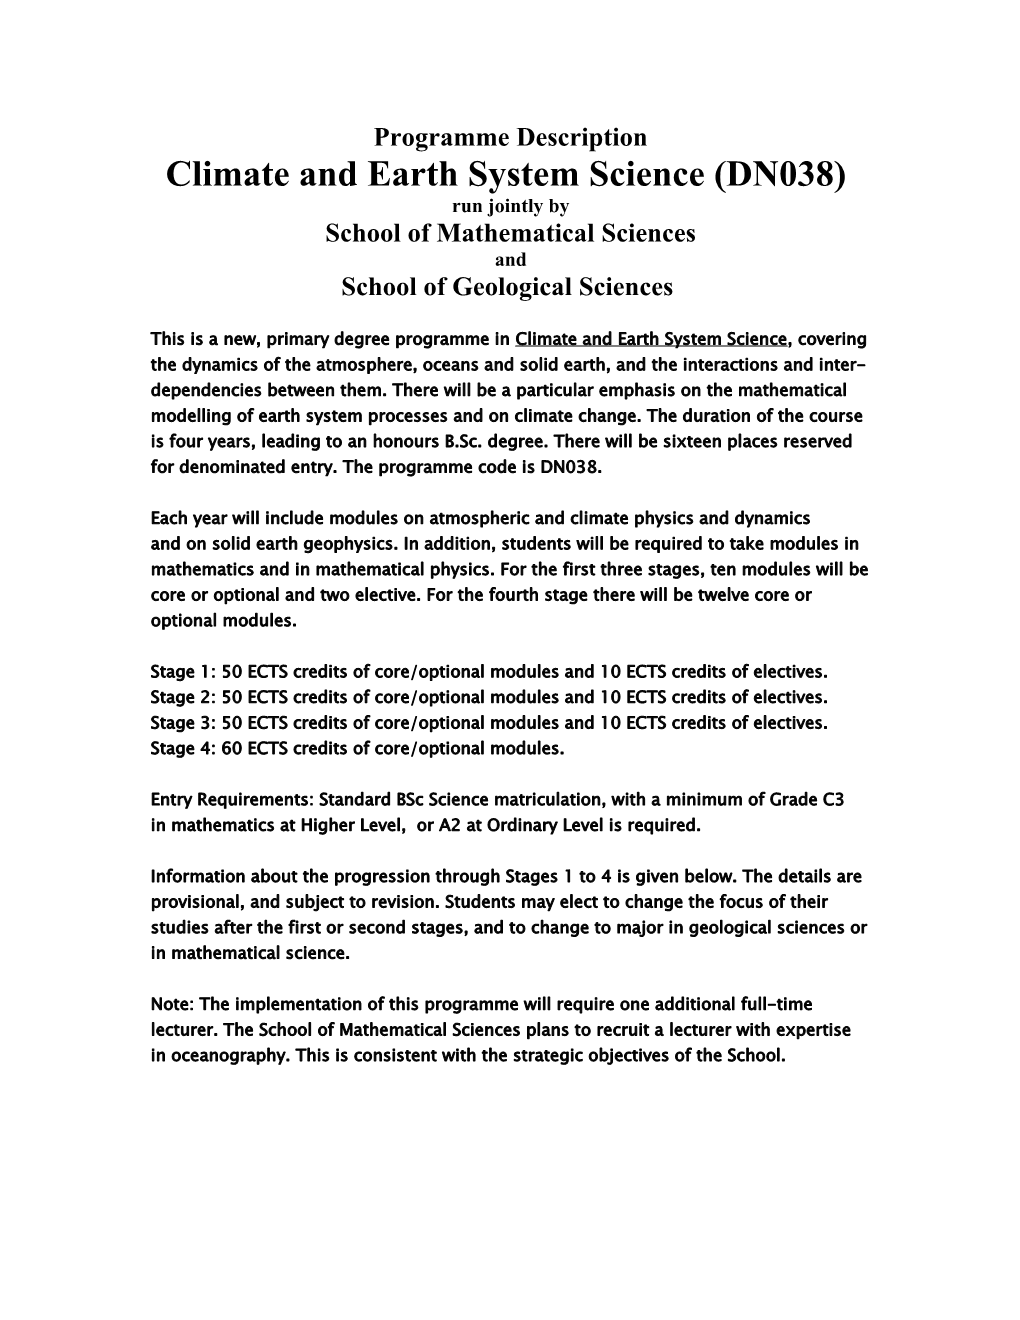 Programme Title: Climate and Earth System Science